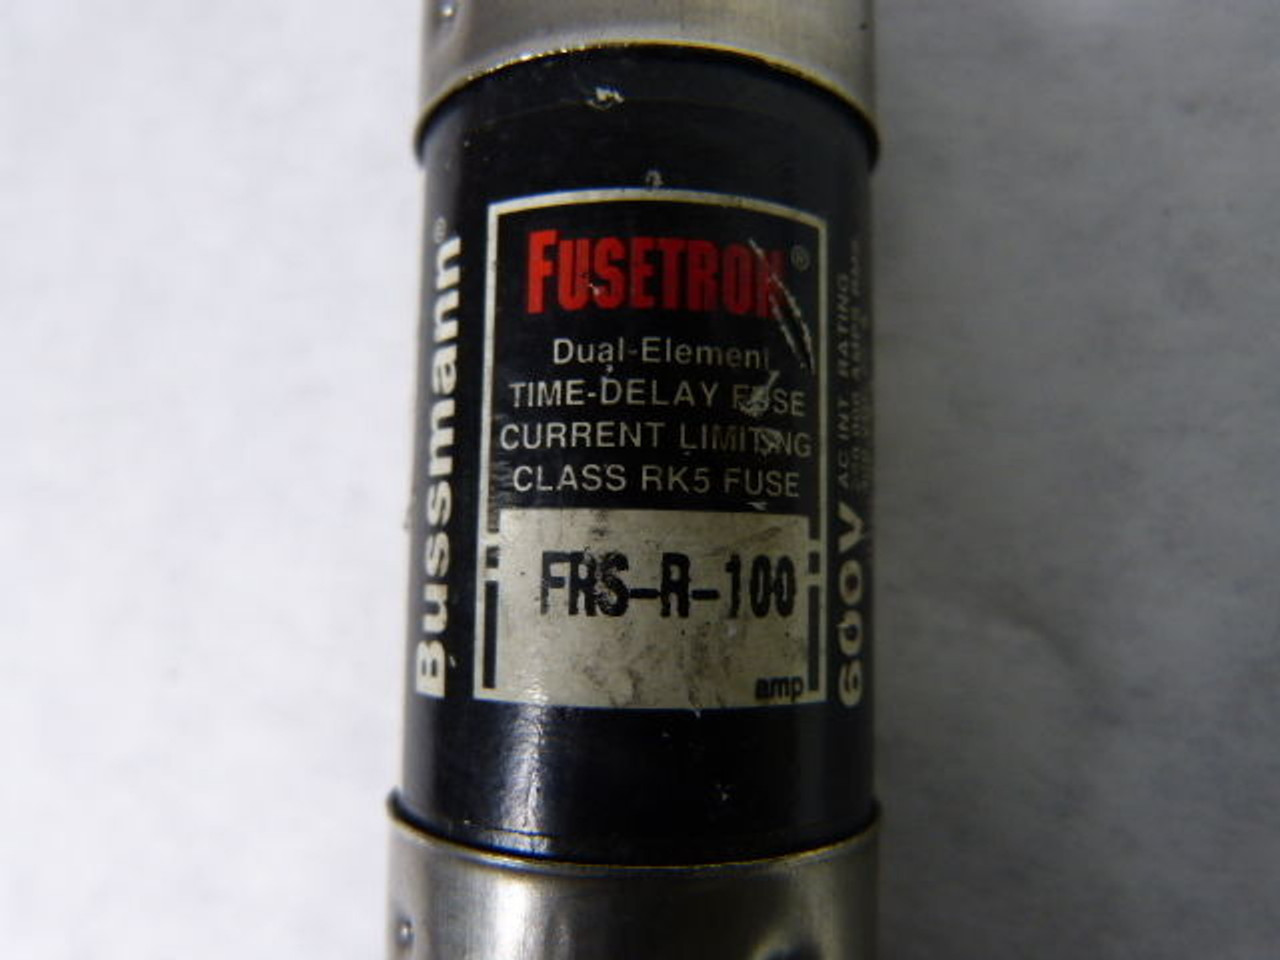 Fusetron FRS-R-100 Time Delay Fuse 100A 600V USED